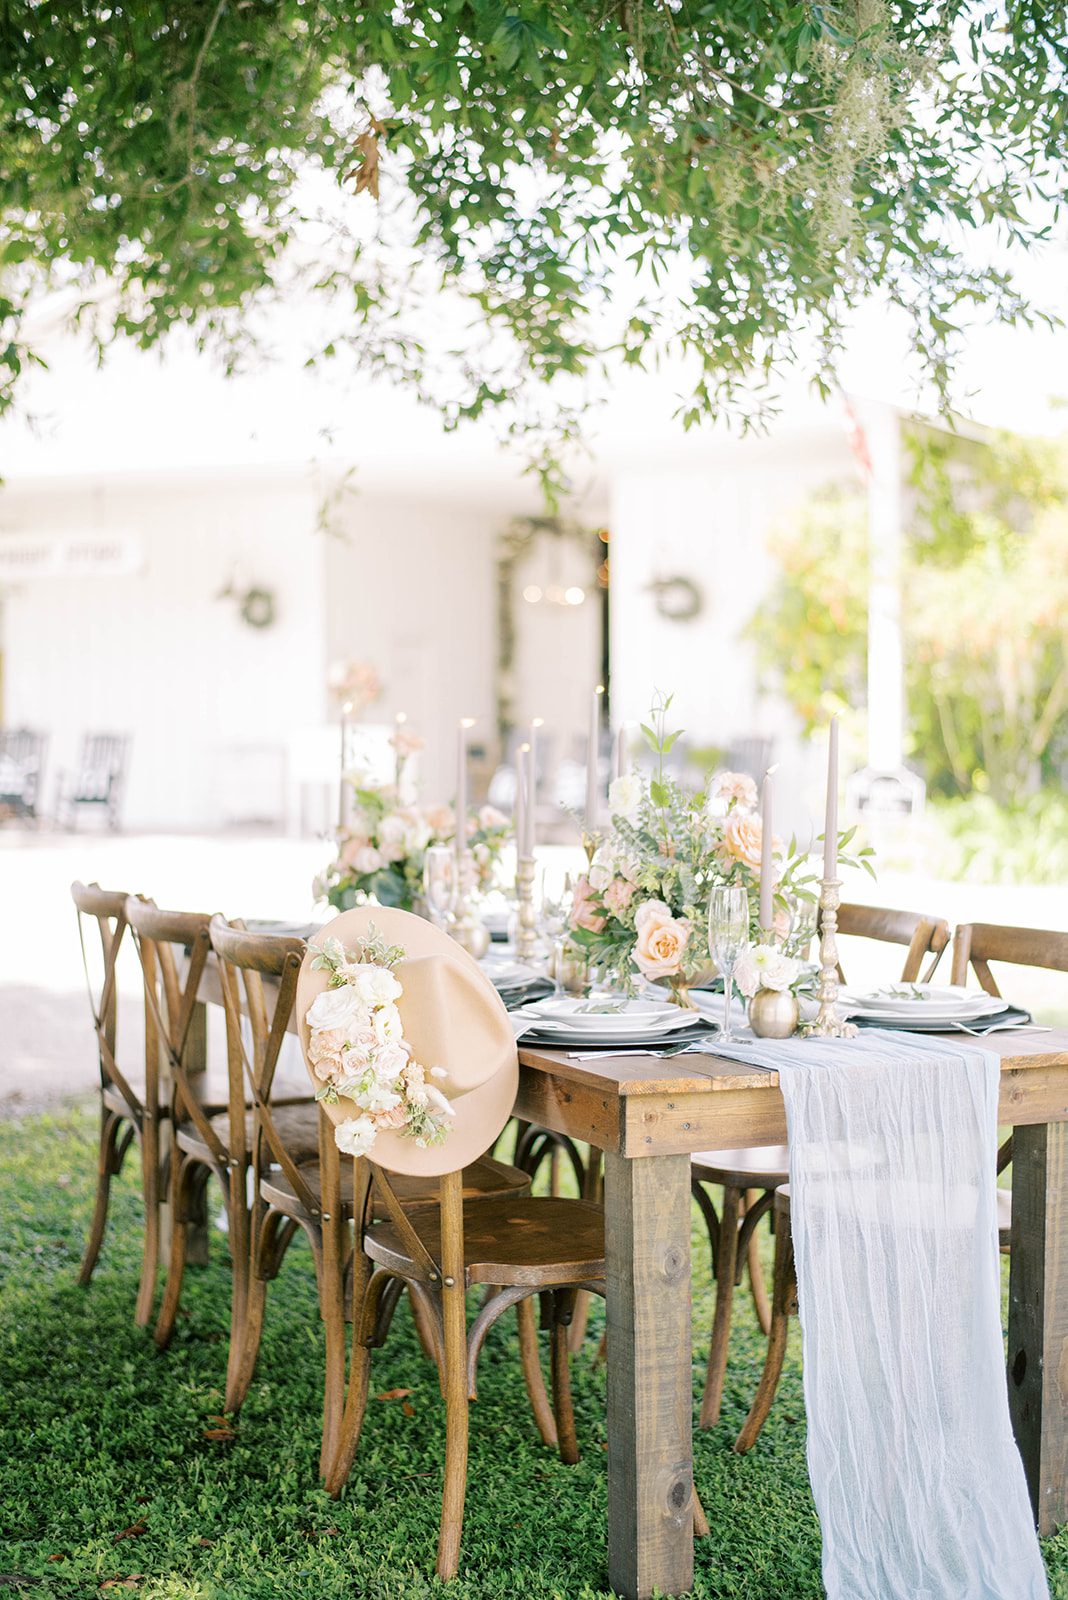 2022 wedding trends of natural rentals at Southern Grace Venue in Florida with table and chair set up for an intimate reception space